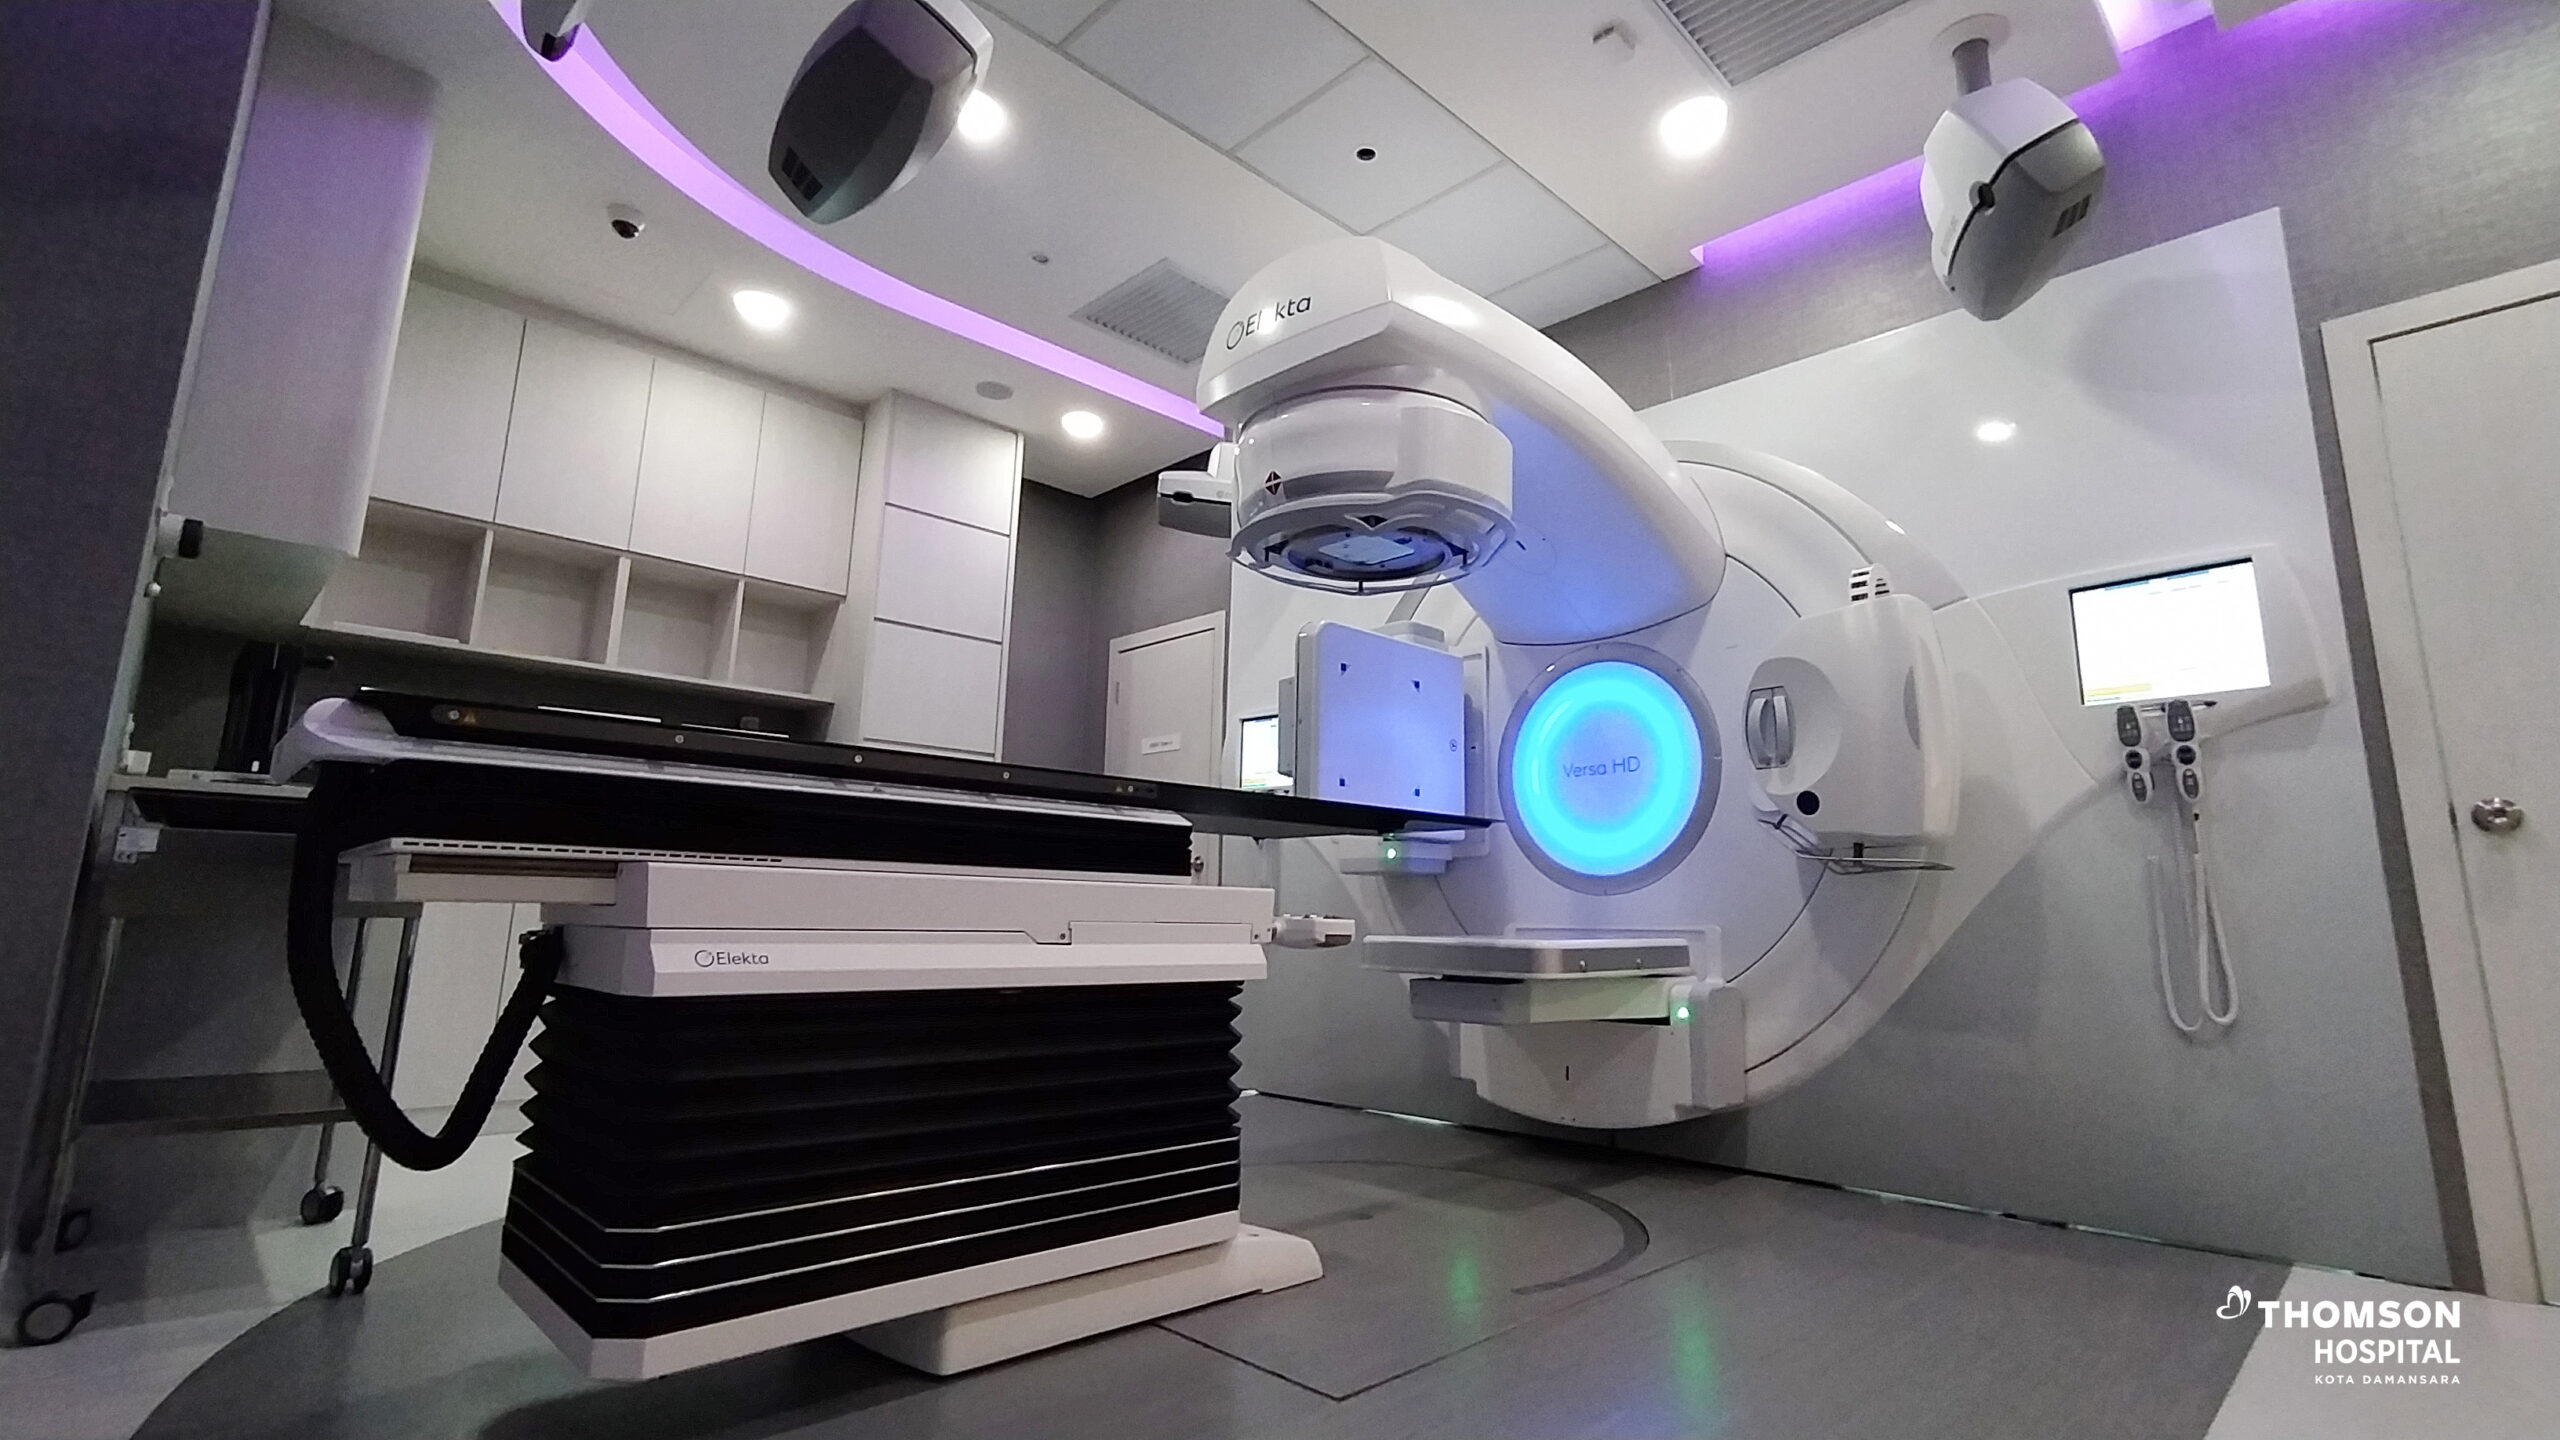 Thomson offers the medical linear accelerator (linac) which customises high energy x-rays or electrons to conform to a tumor_s shape and destroy cancer cells while sparing surrounding normal tissue